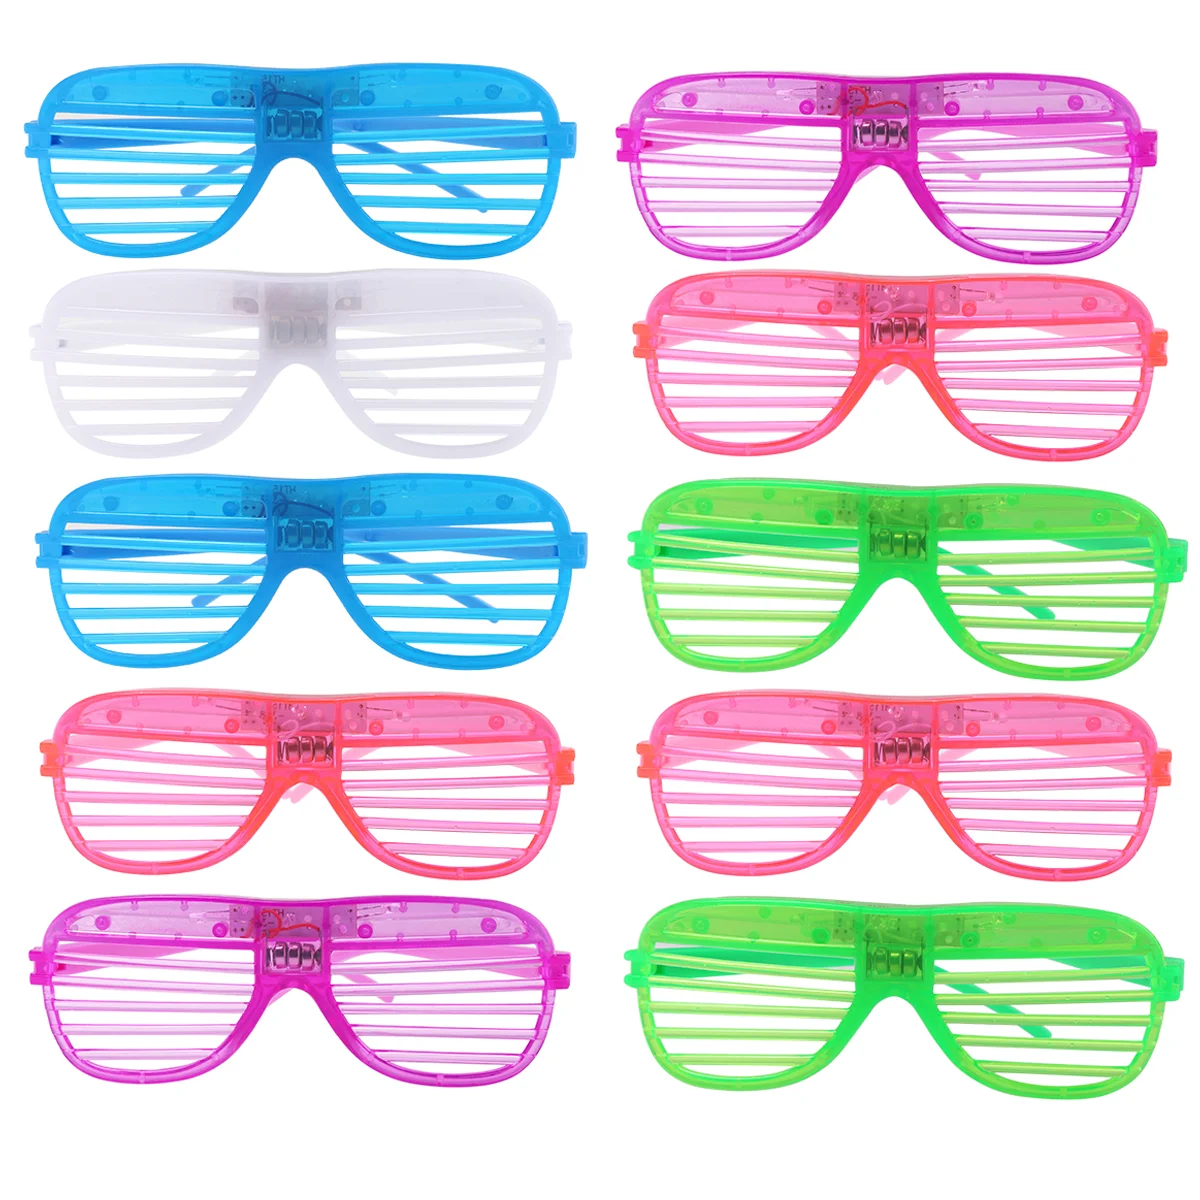 

12 Pairs of Plastic Shutter Shades Grid LED Glasses Eyewear Halloween Club Party Cosplay Props (Random Color)